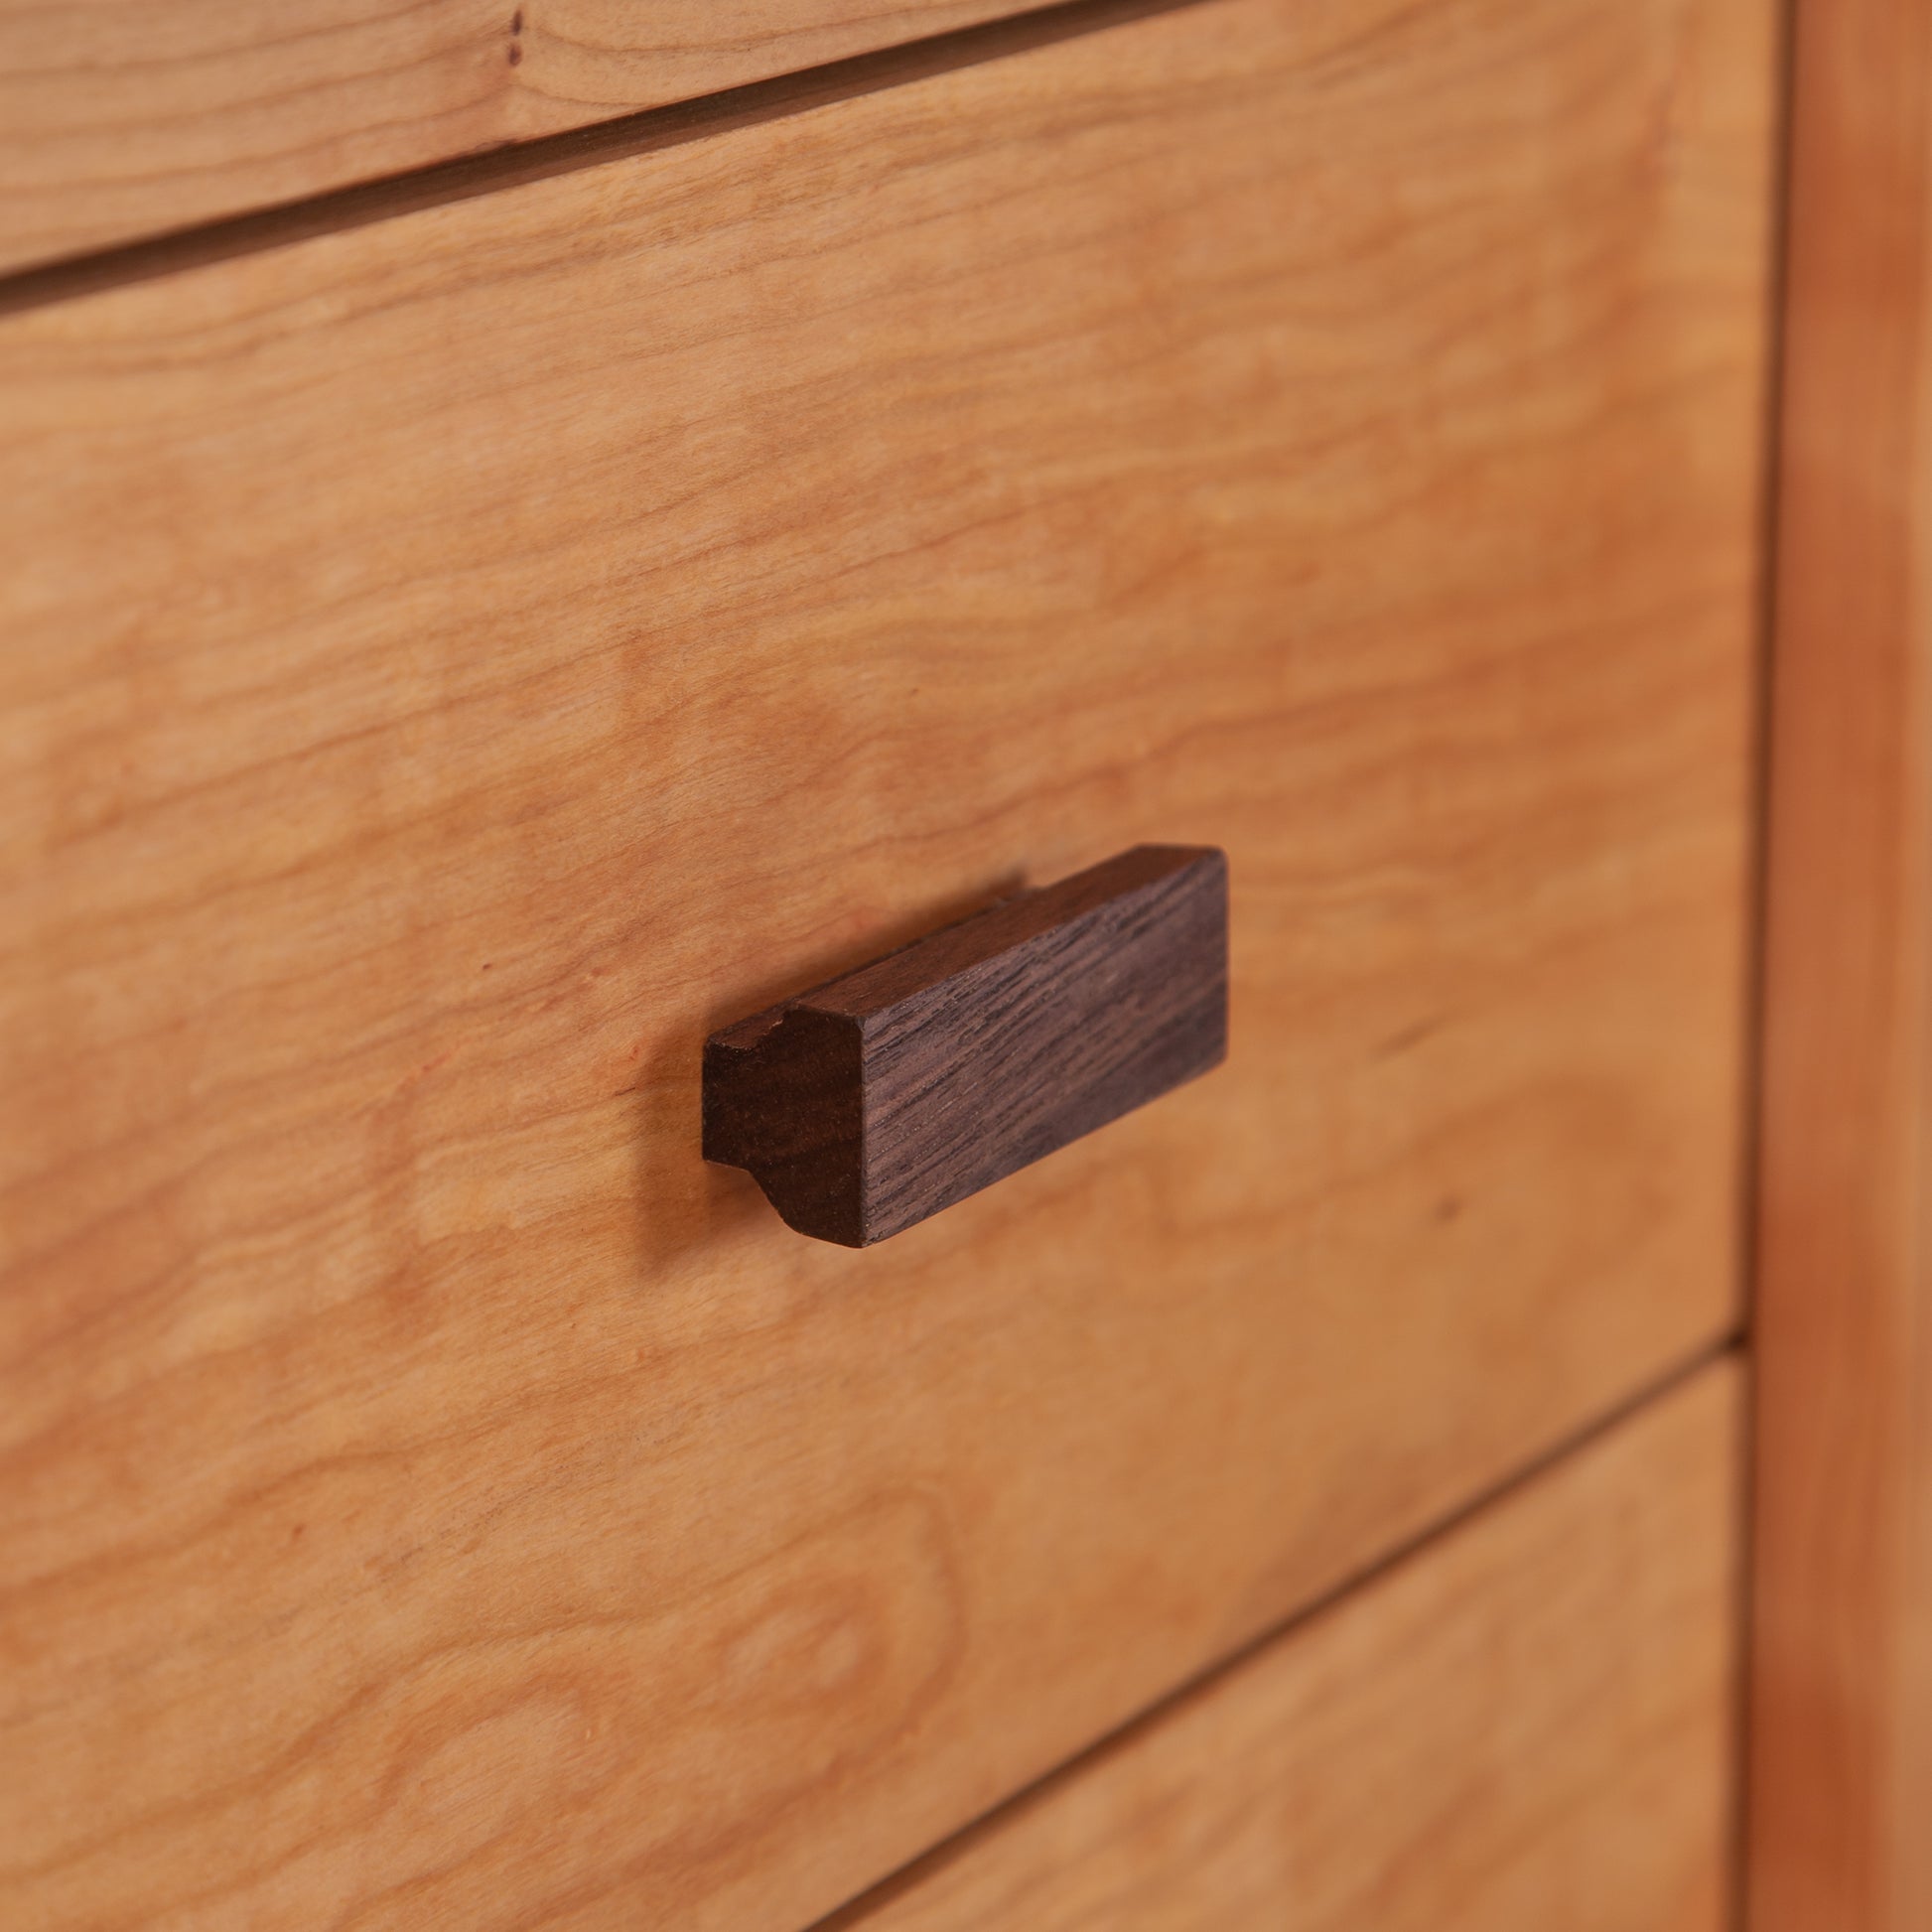 A close up of a wooden drawer handle.